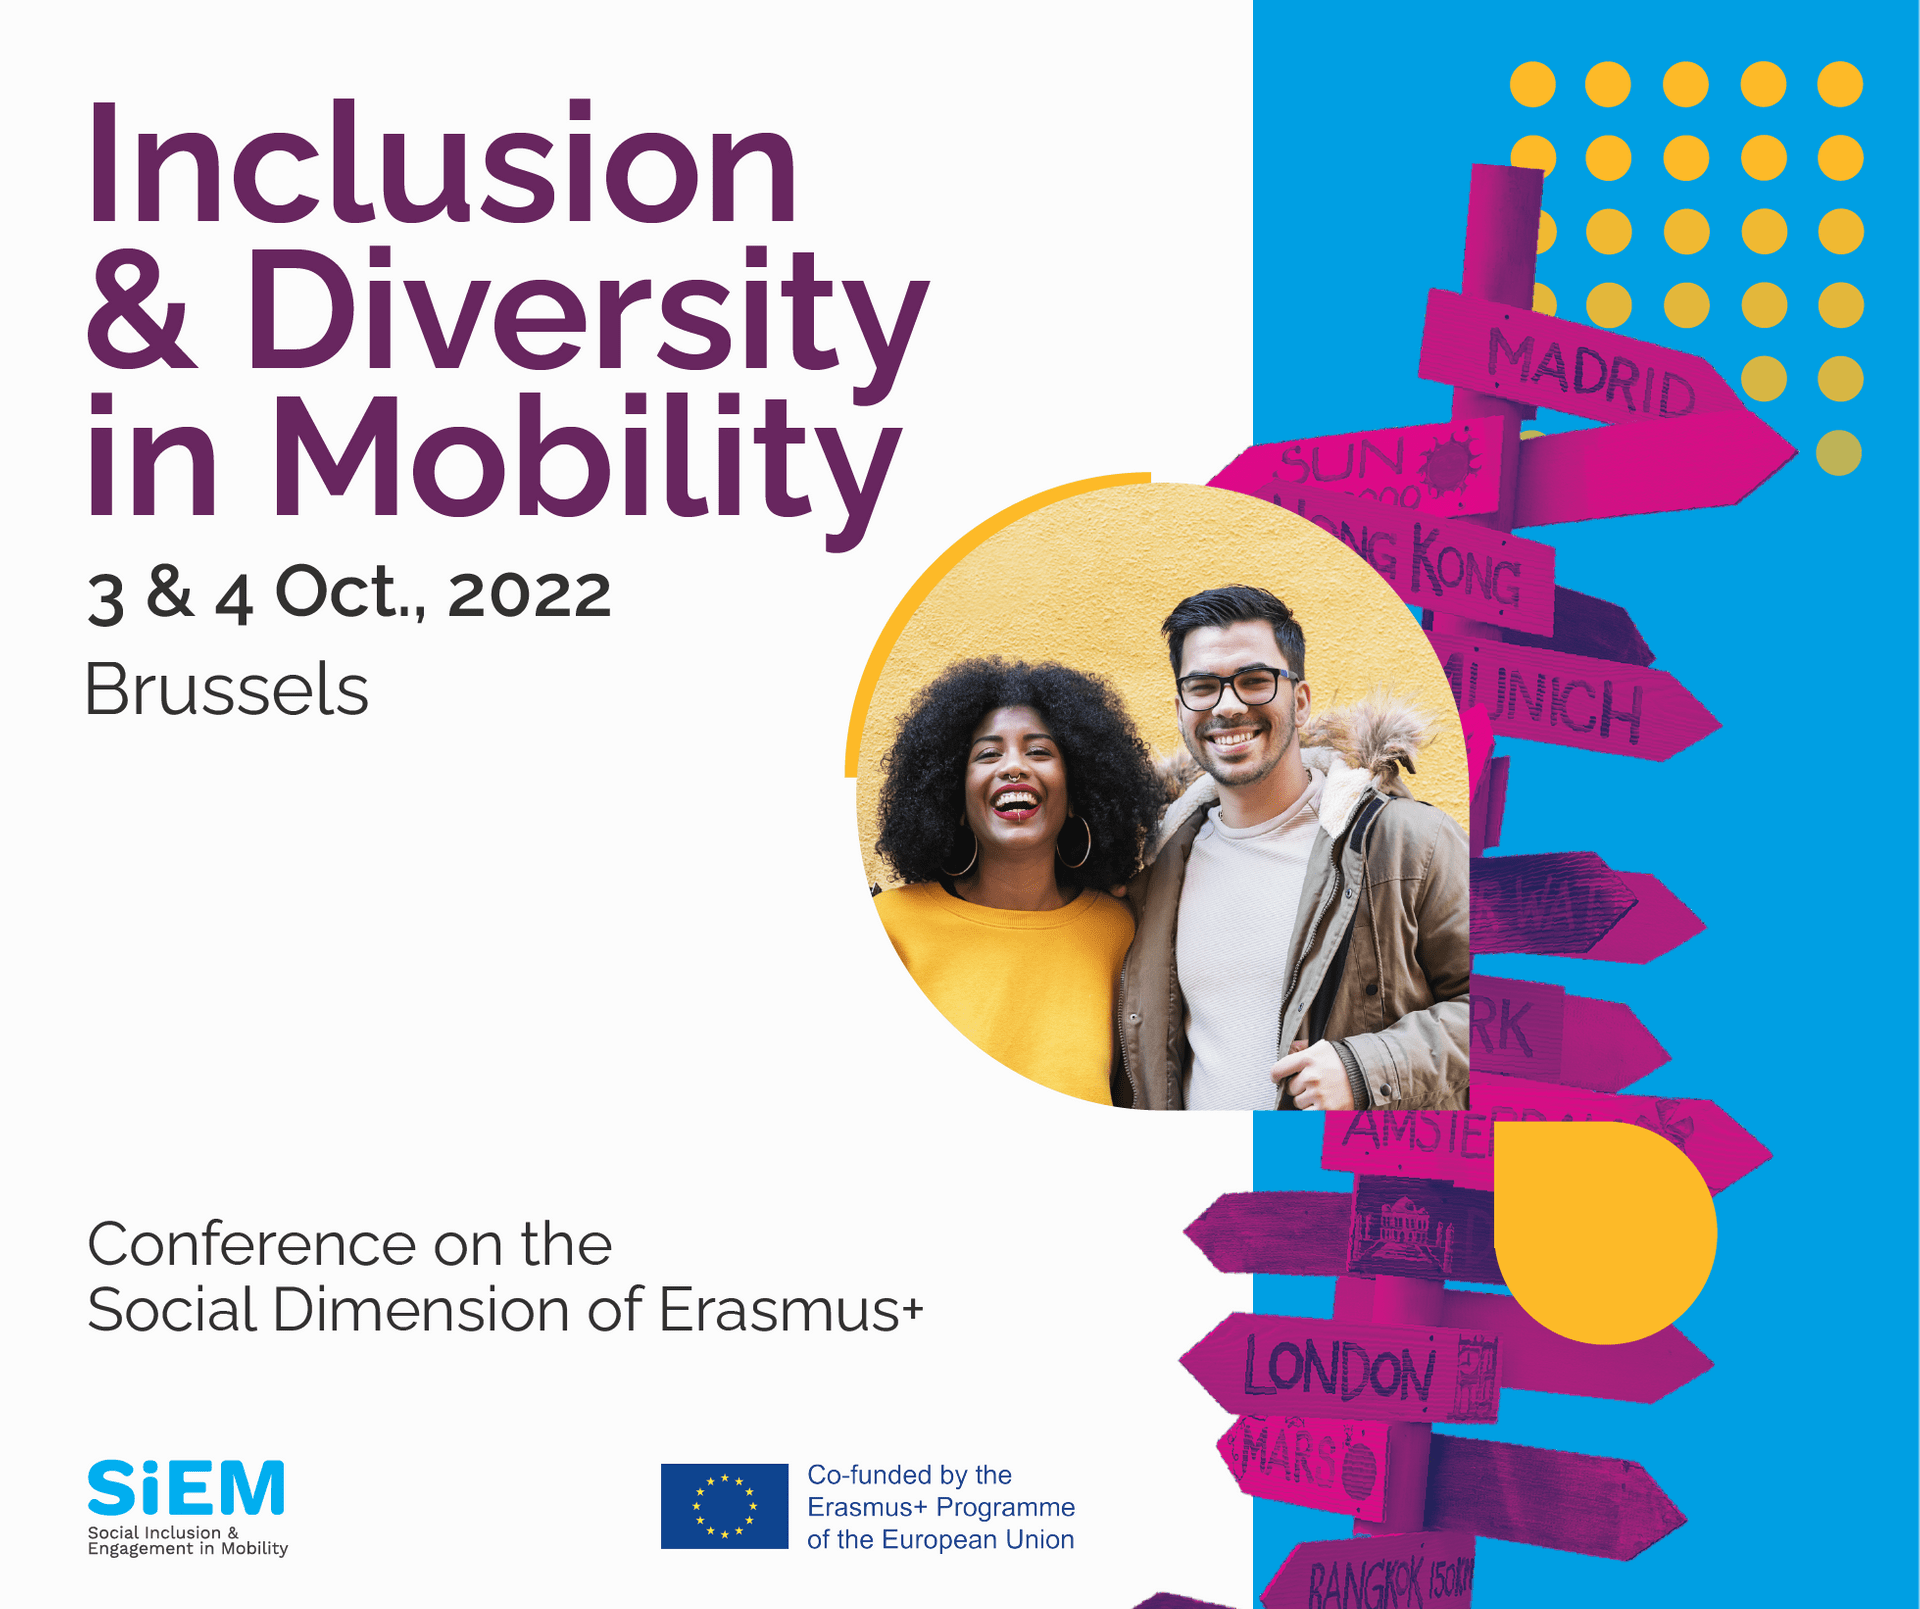 Inclusion and Engagement in Mobility, a Conference on the Social Dimension of Erasmus+